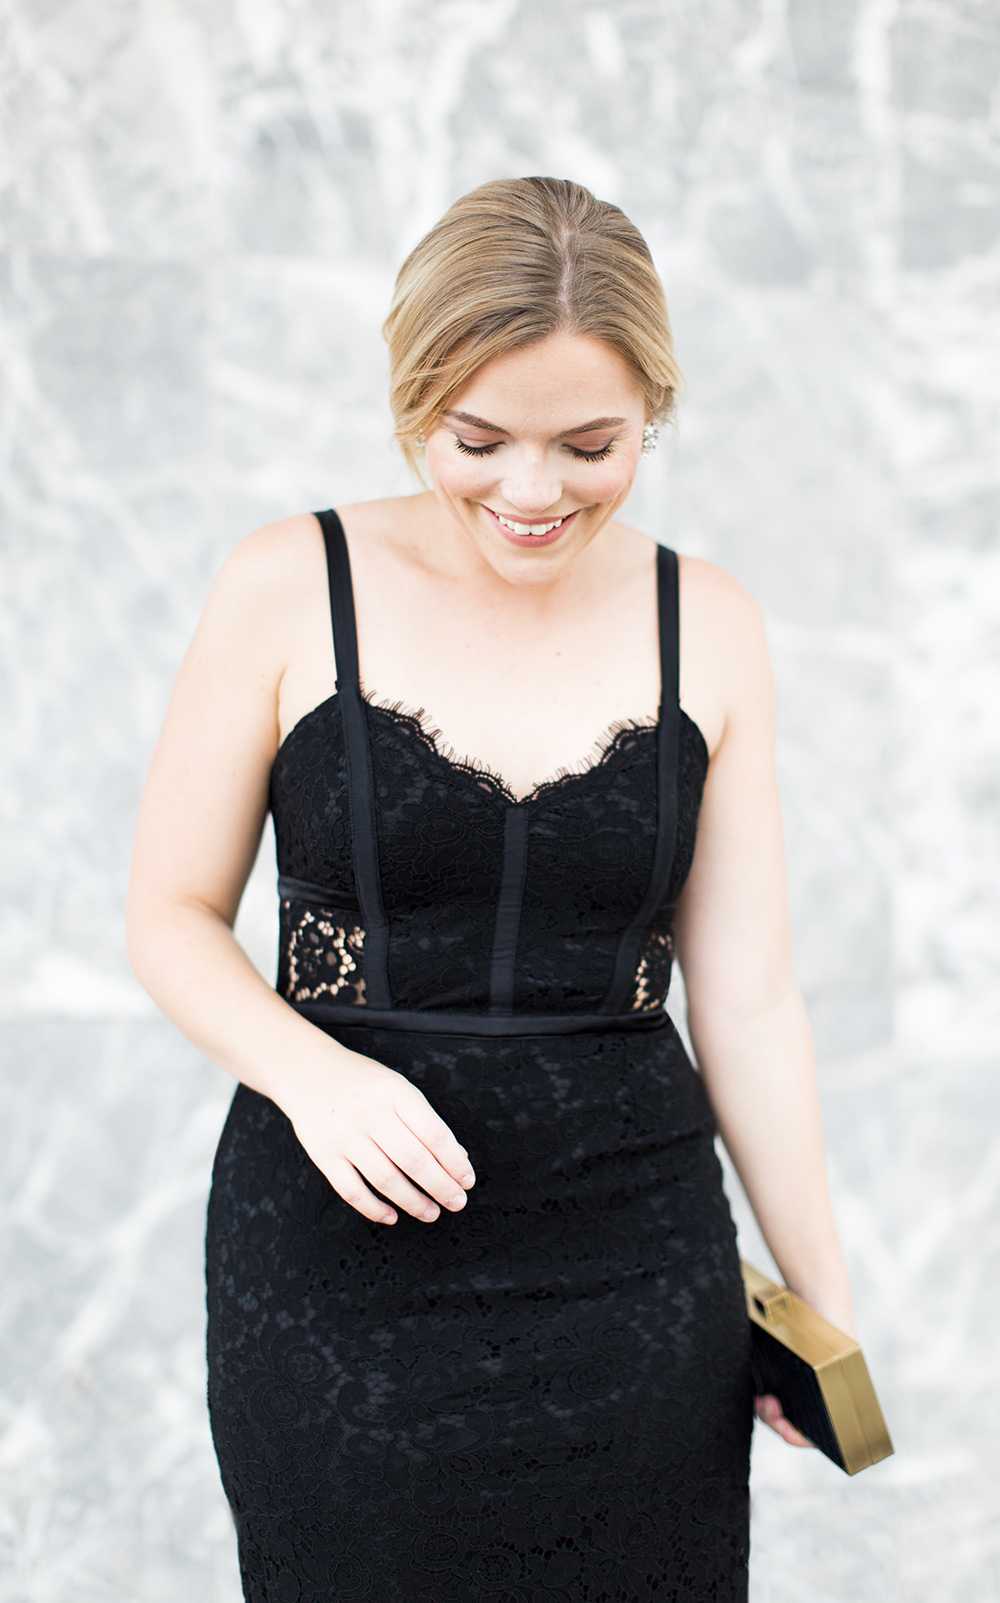 Express Black Lacey Dress + Giveaway